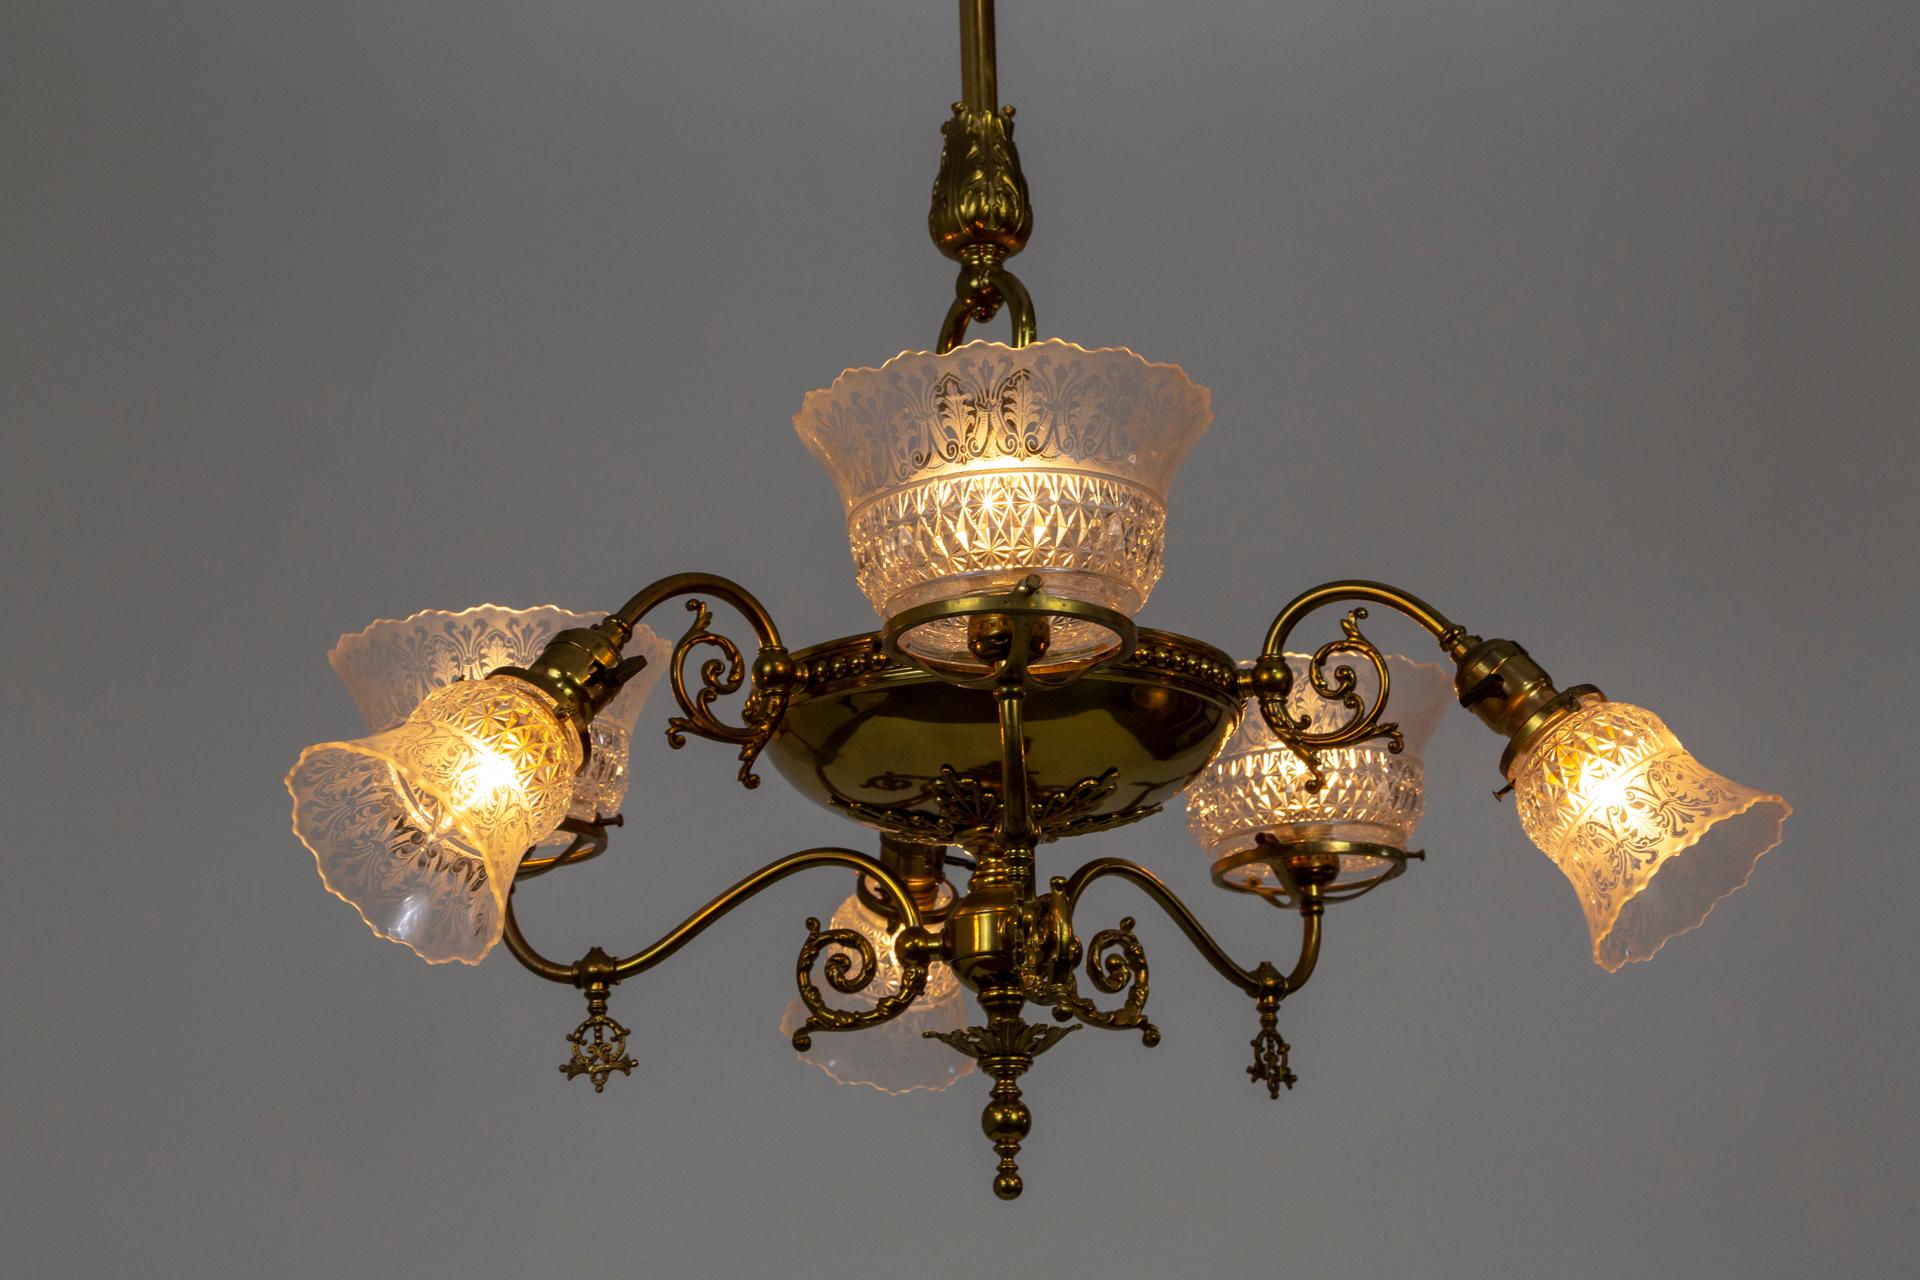 A Victorian, brass chandelier alternating between larger up lights and smaller down lights. The original shades are molded, etched glass in bell form with scalloped edges. A lengthy, substantial stem and acanthus leaf accents, scroll arms and large,